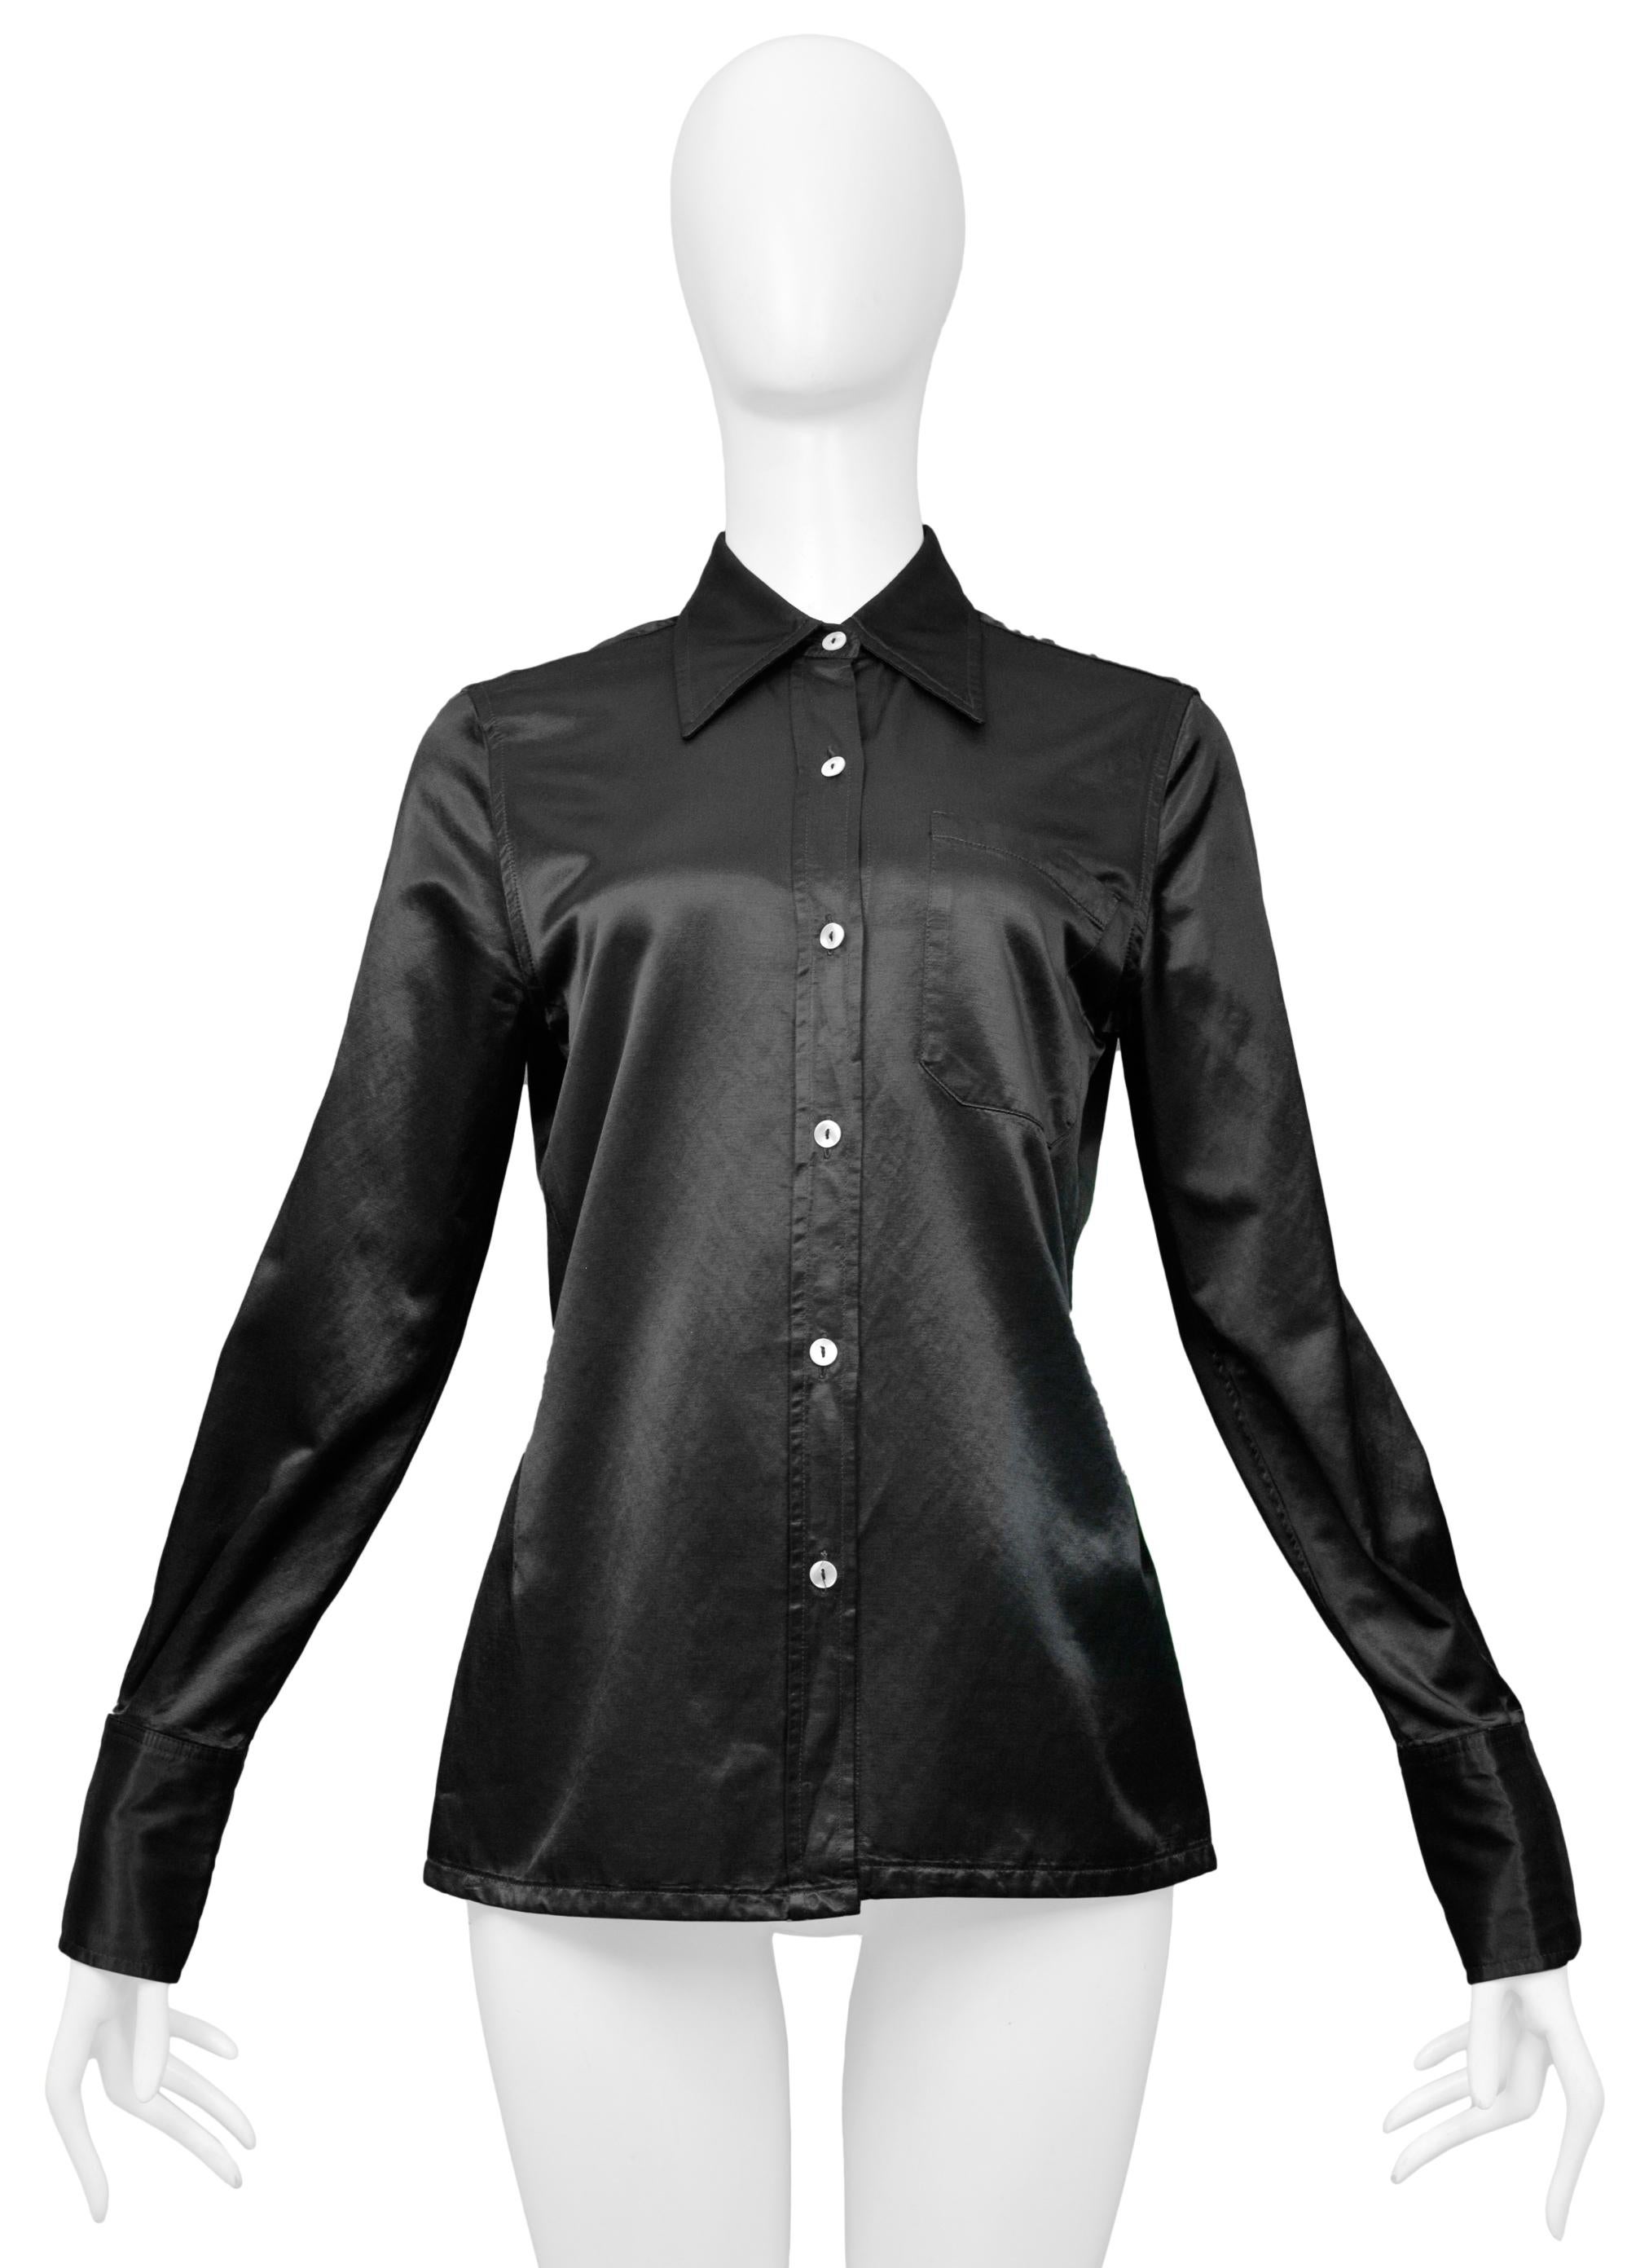 Resurrection Vintage is excited to offer a vintage Maison Martin Margiela black satin button-down shirt featuring long sleeves, contrasting buttons, one breast pocket, and a folder over collar.

Maison Martin Margiela
Size 42
Cotton and